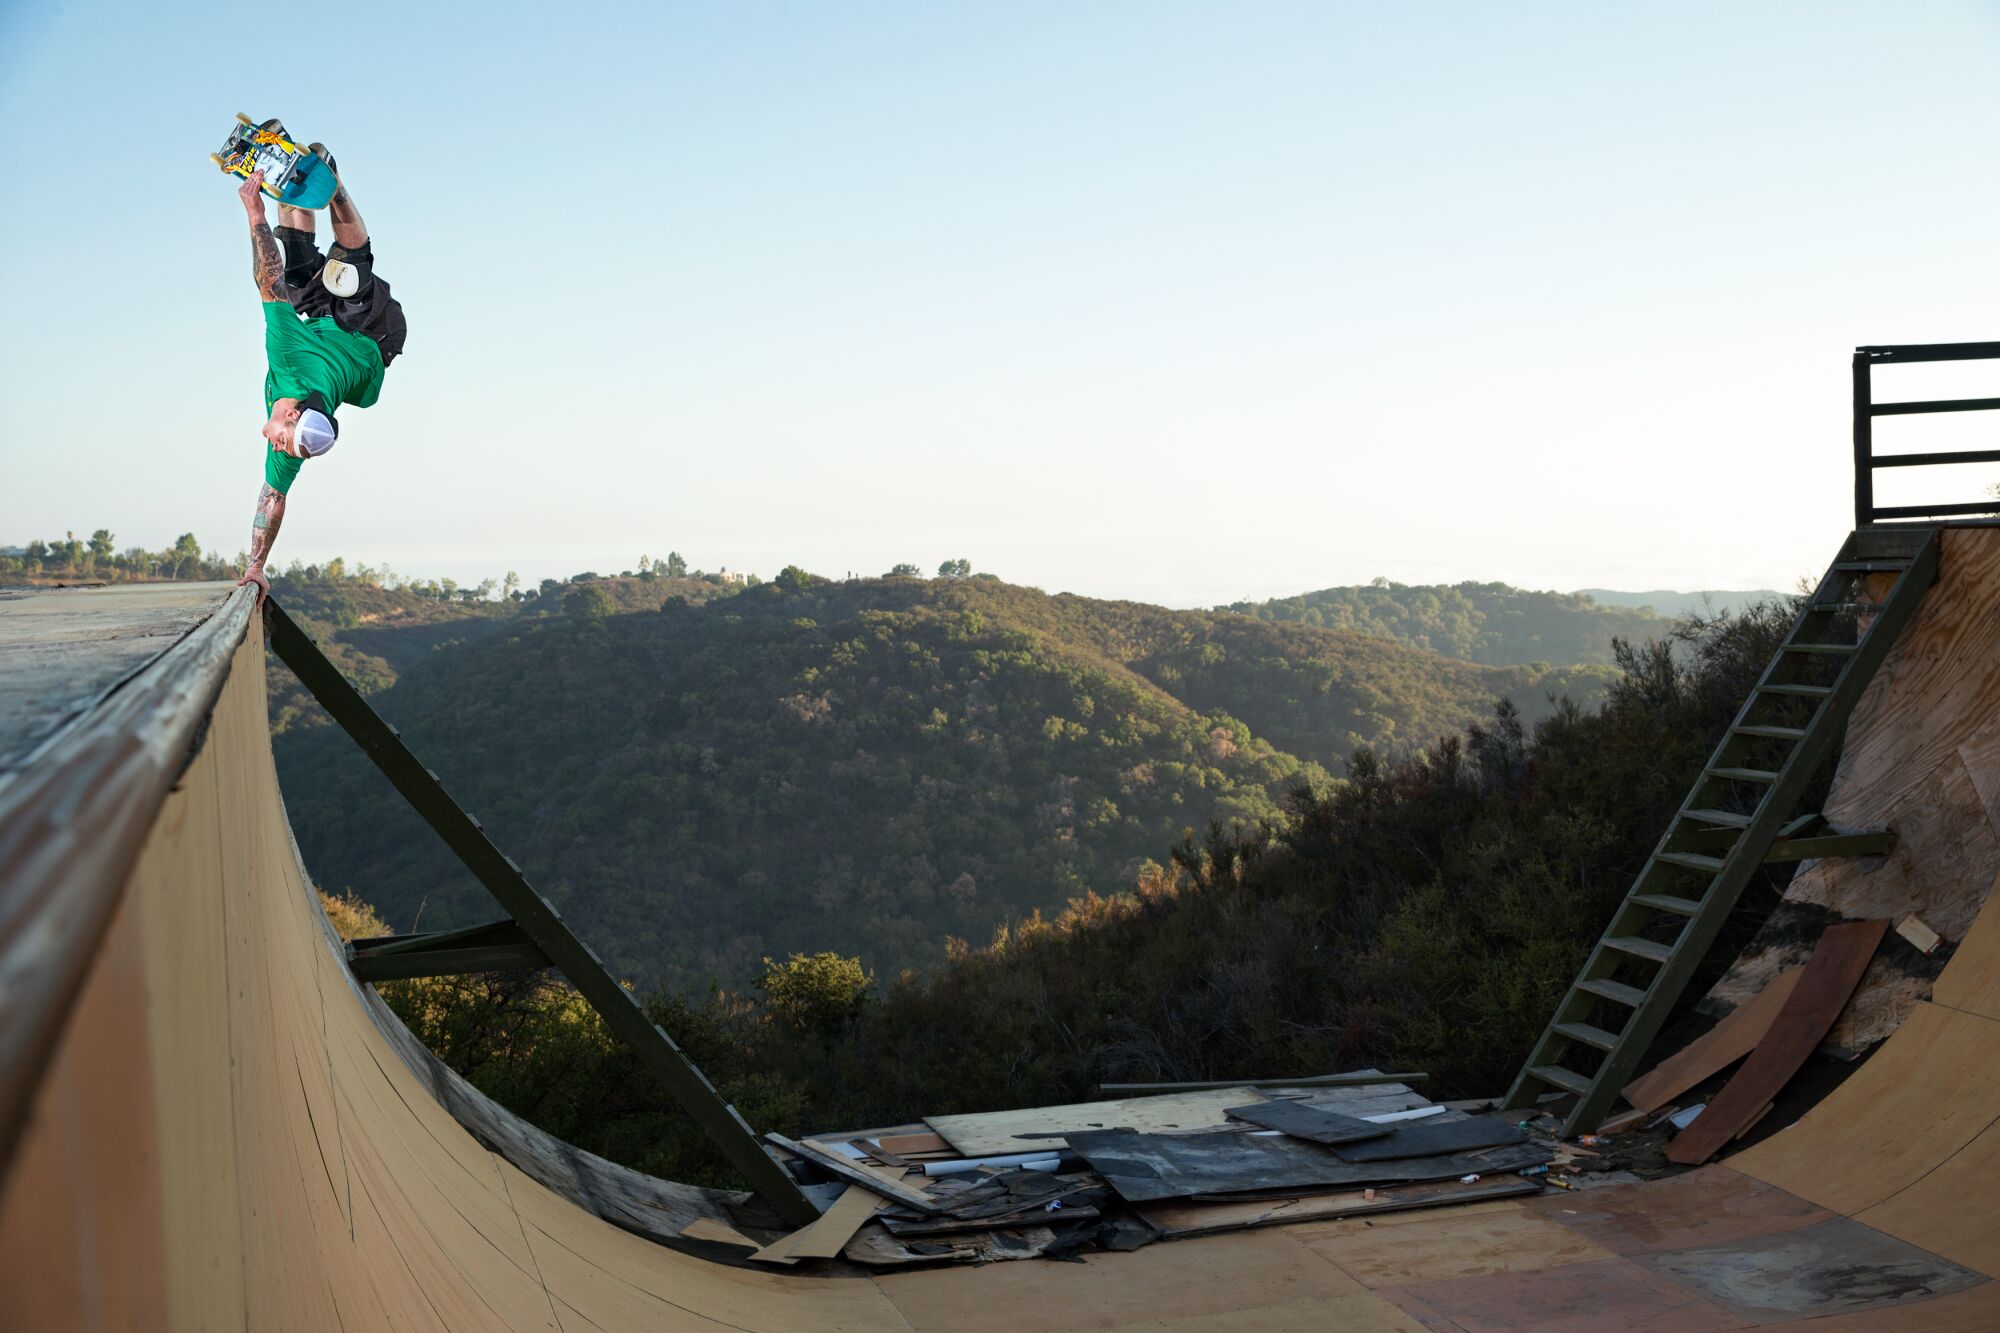 Jeff Grosso performs a straight-legged invert during the Vans Propeller Vert Session in Malibu on Oct. 12, 2014.